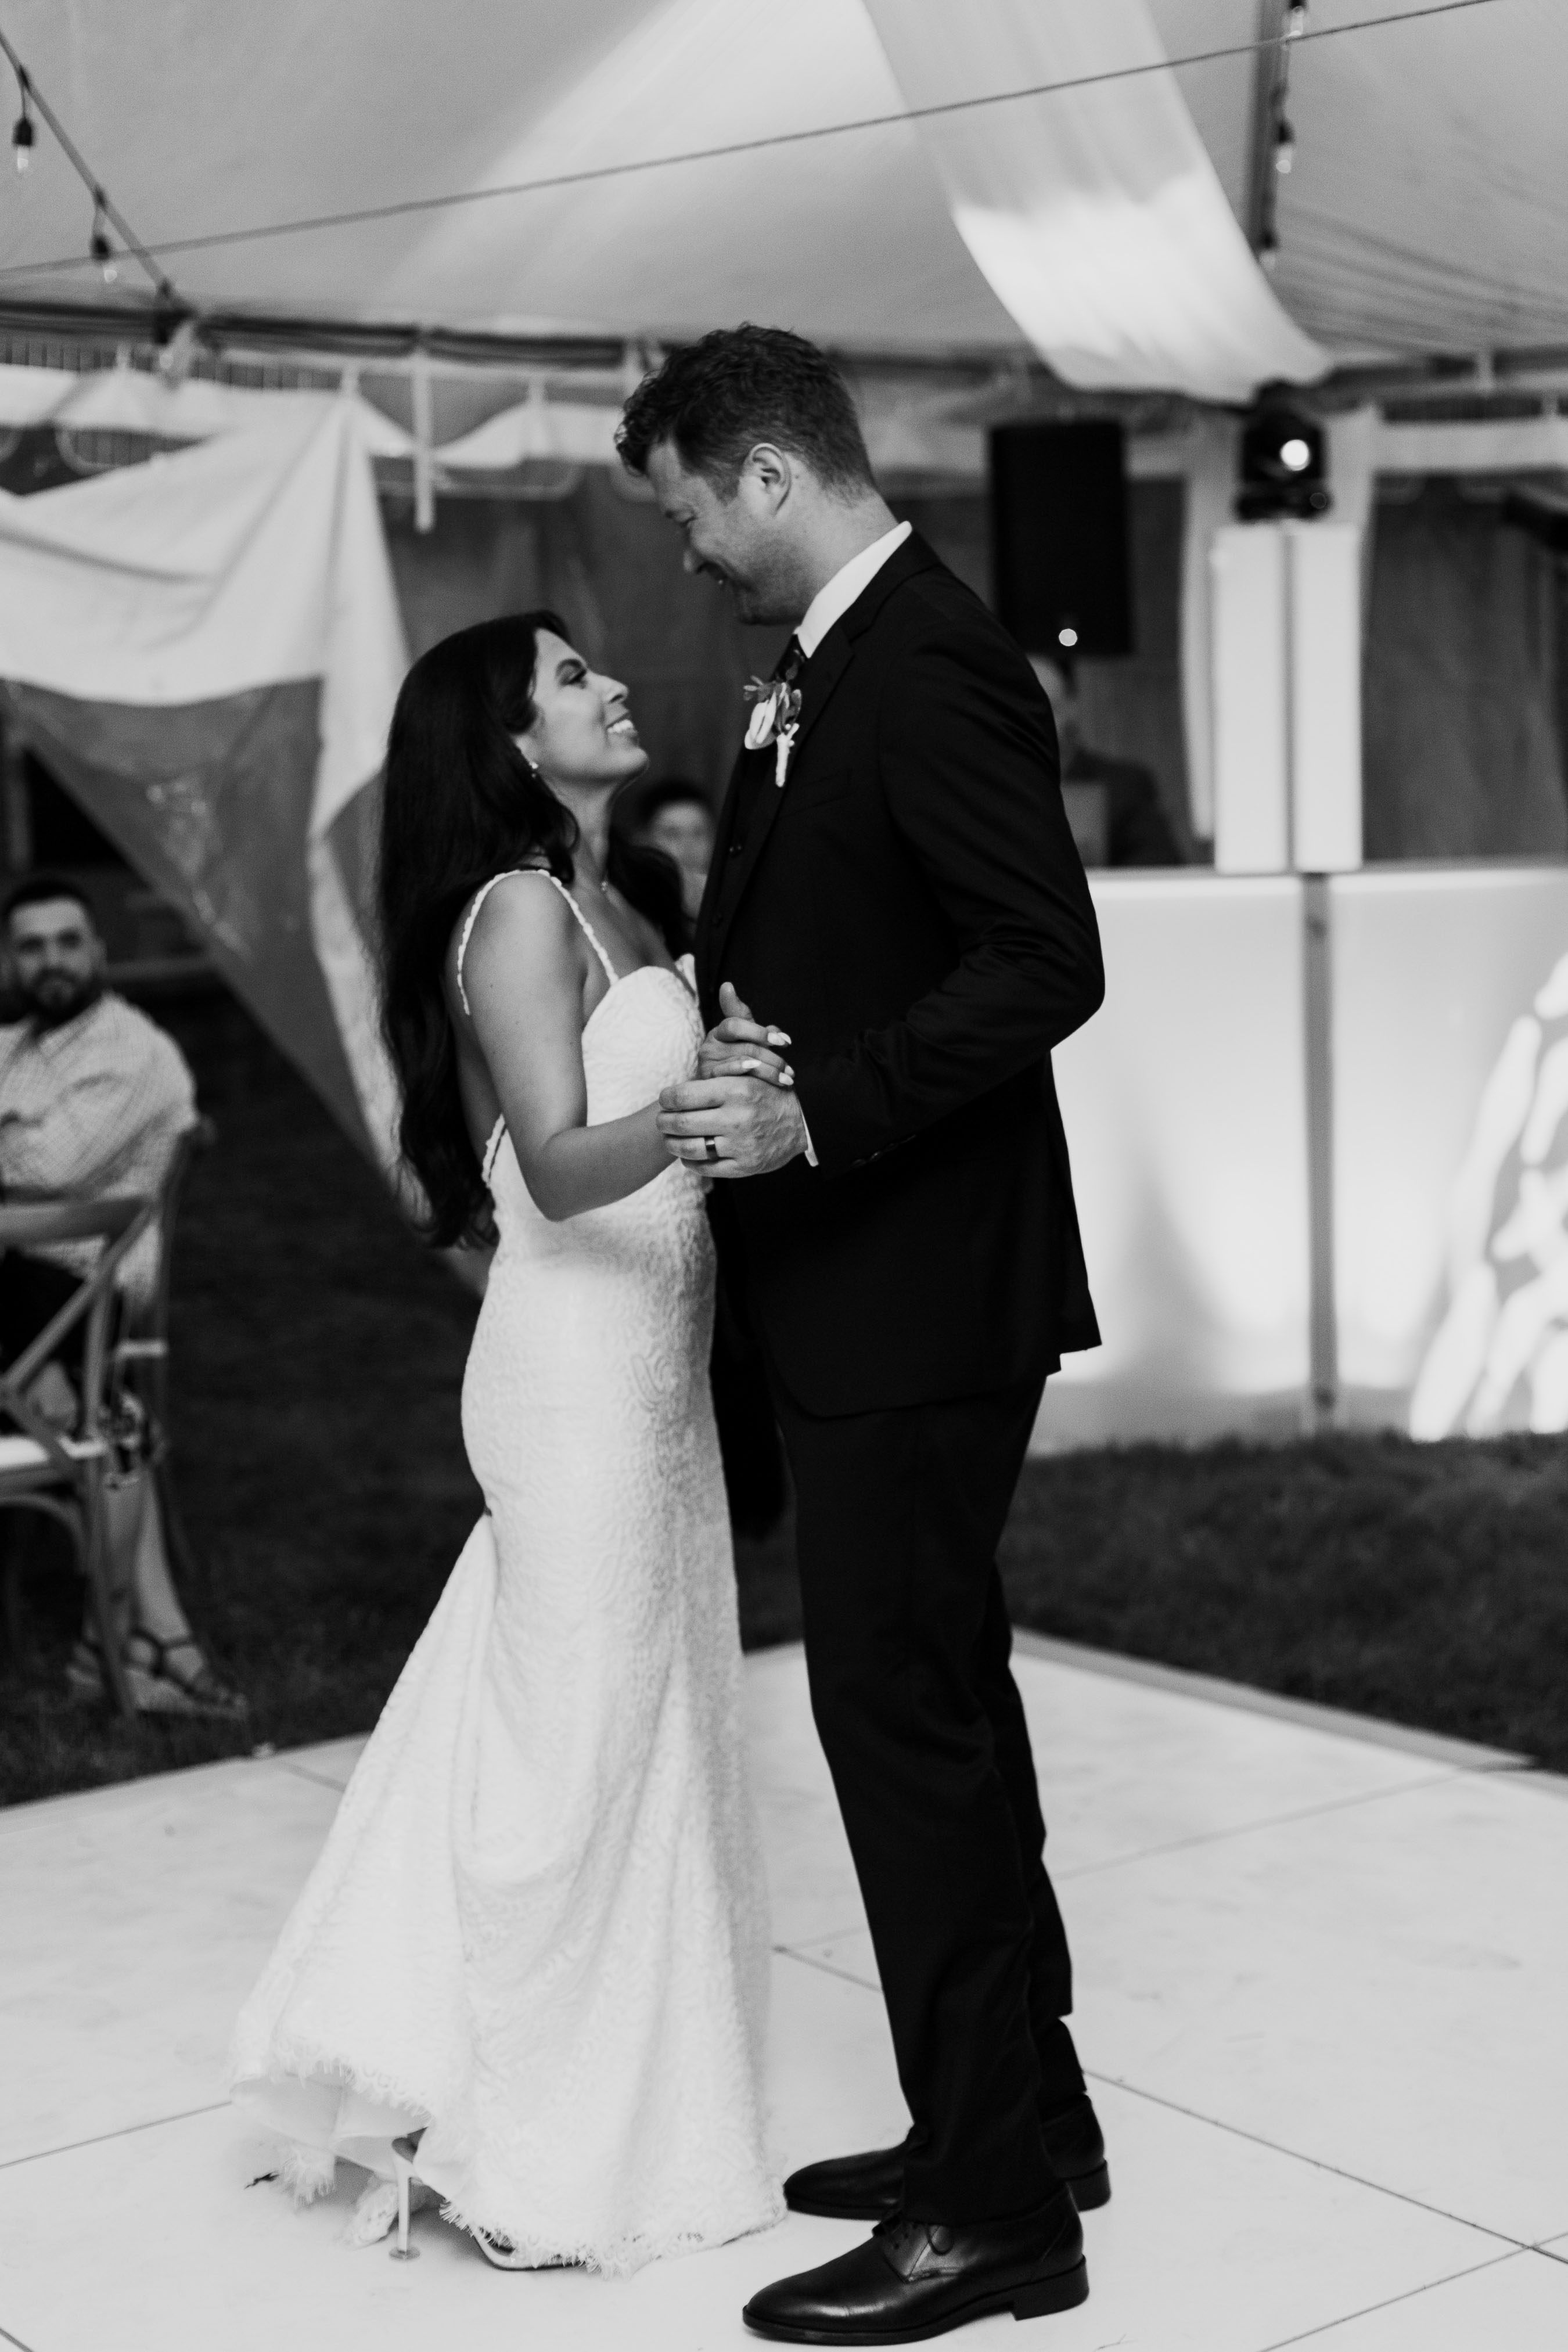 First dance in wedding tent